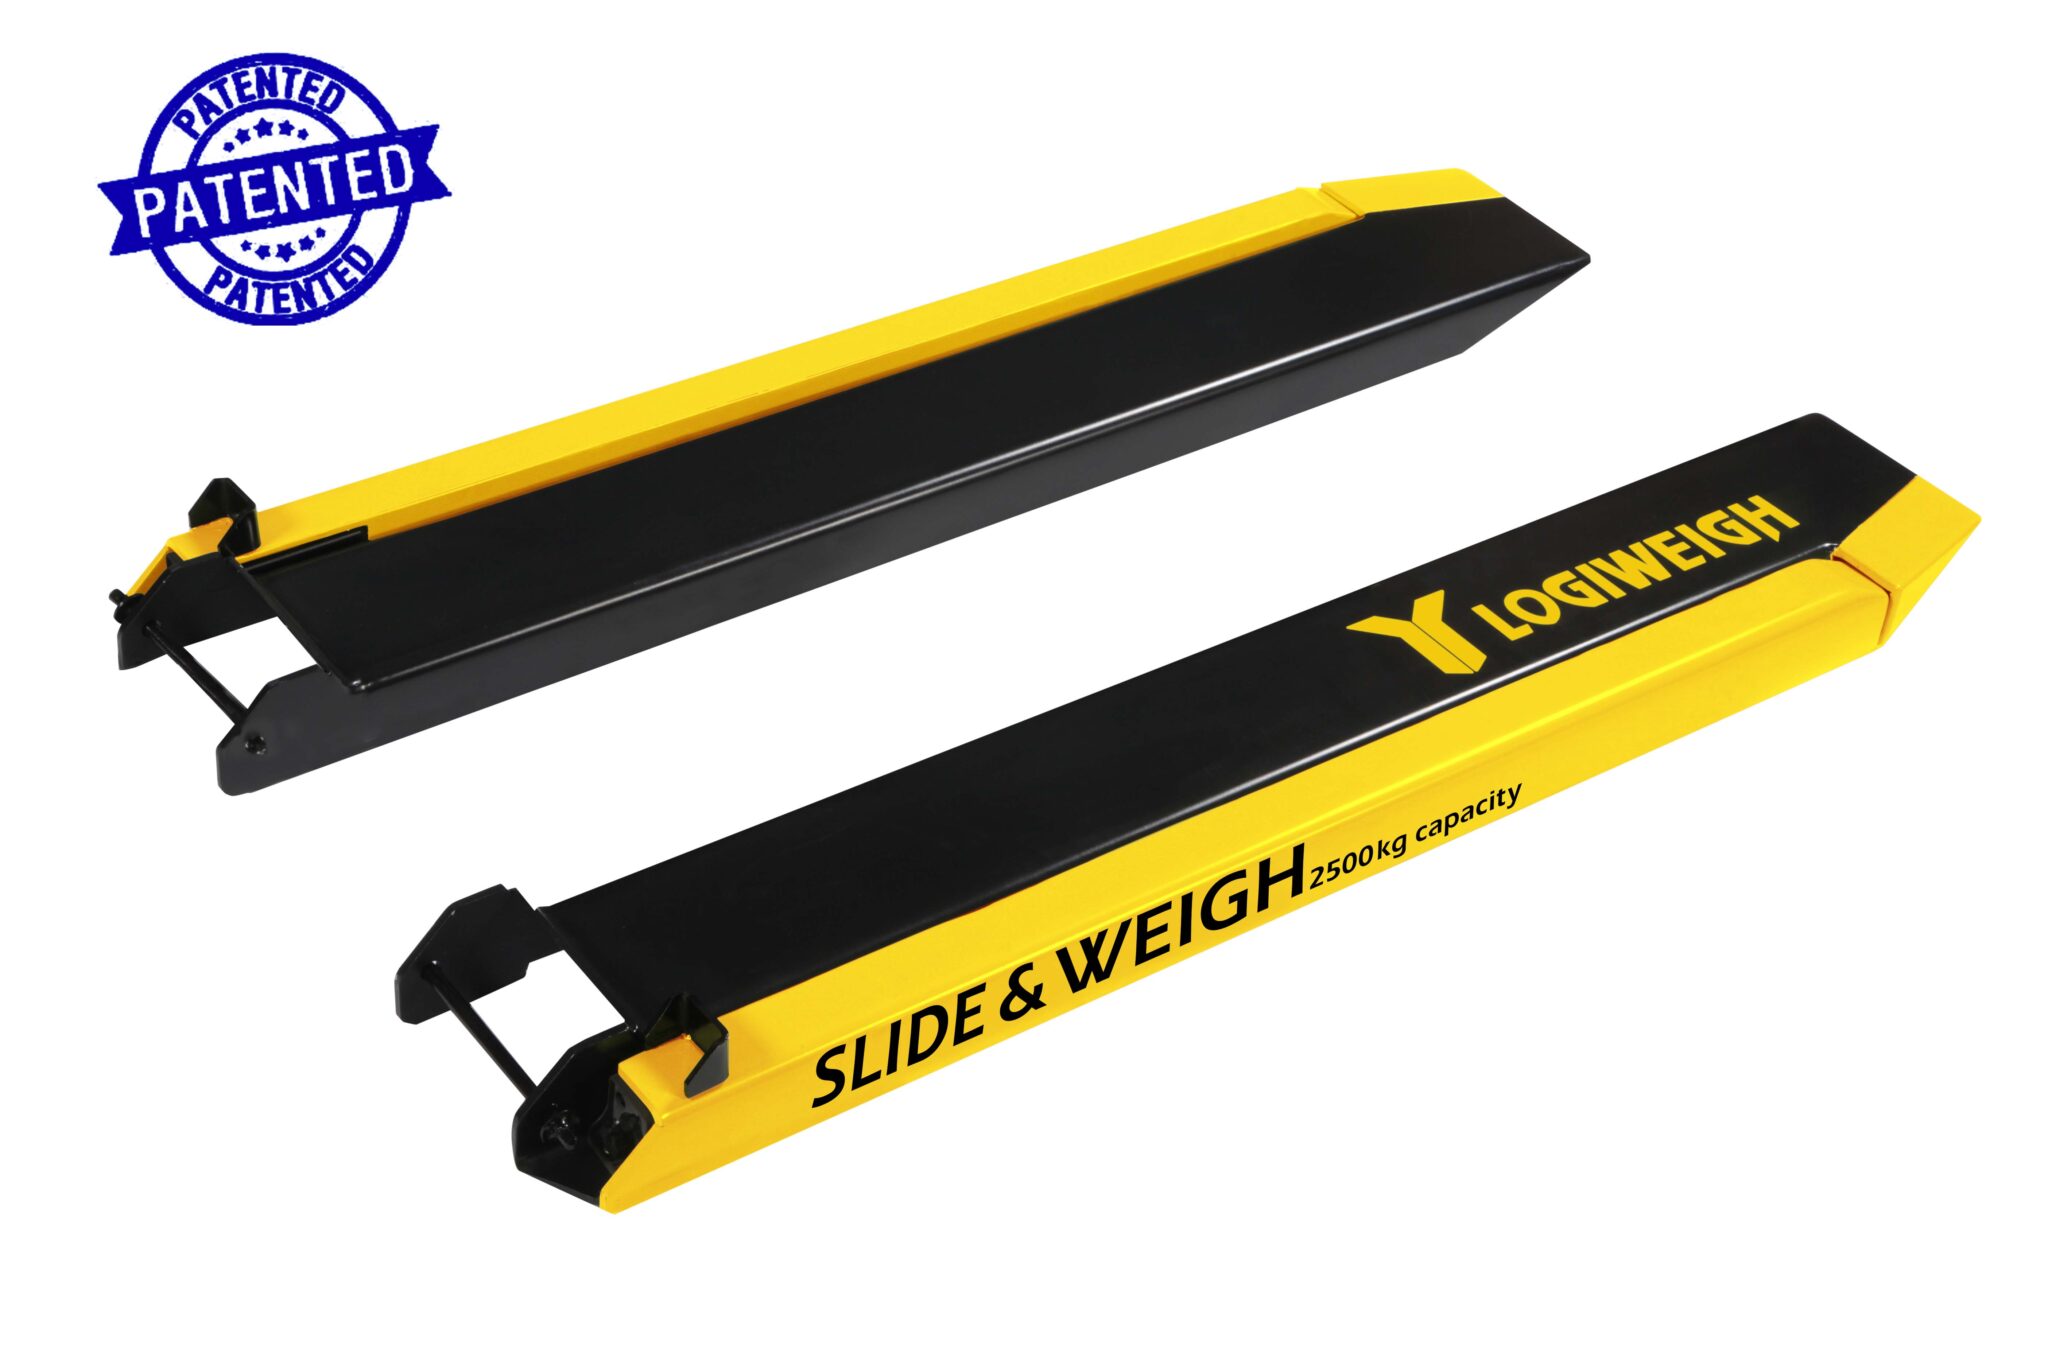 SLIDE AND WEIGH FORKLIFT SCALE